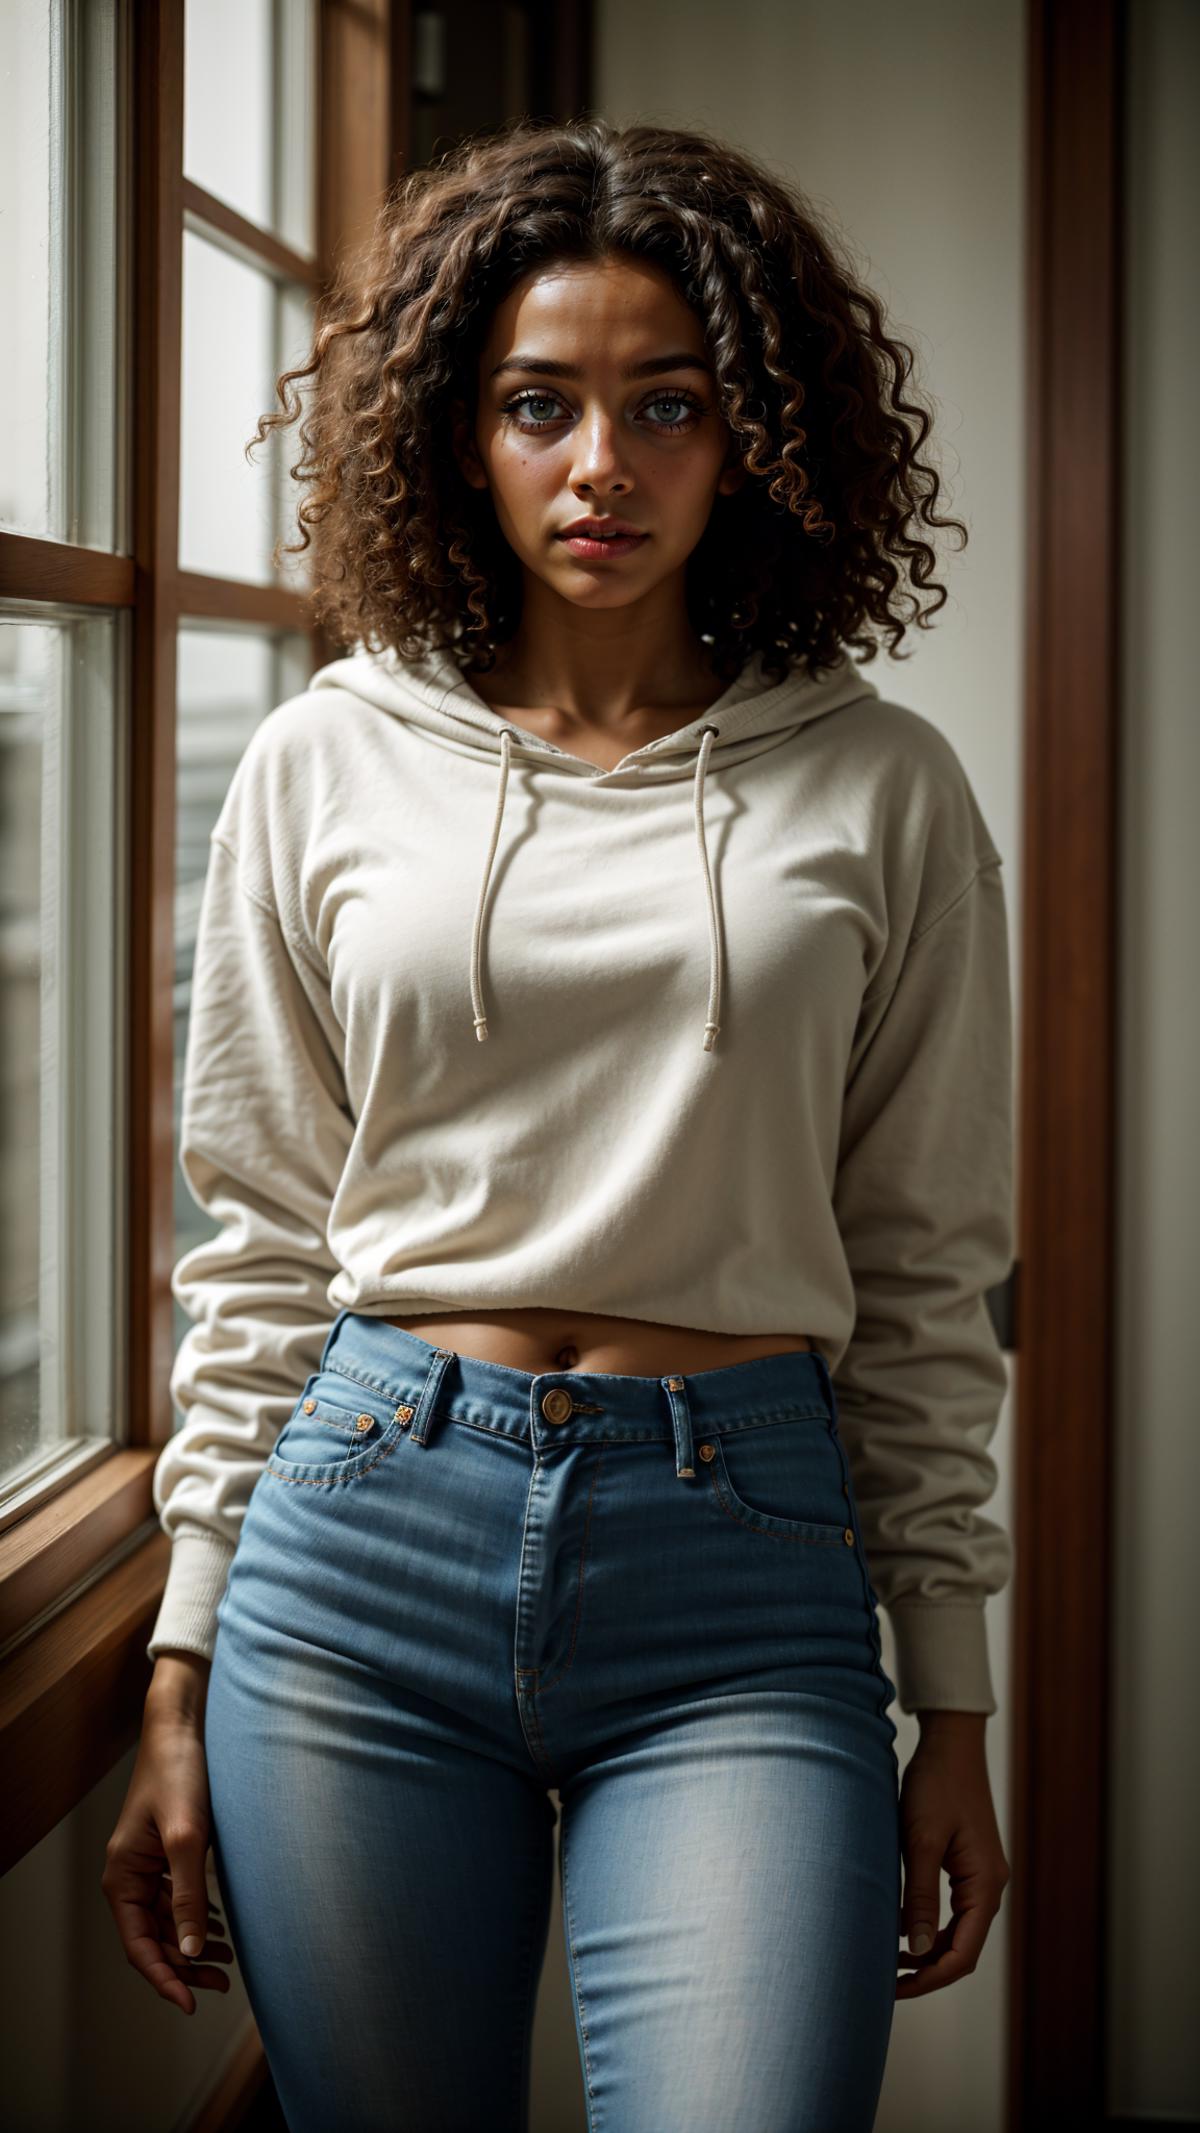 A woman wearing a hooded sweatshirt and jeans stands by a window.